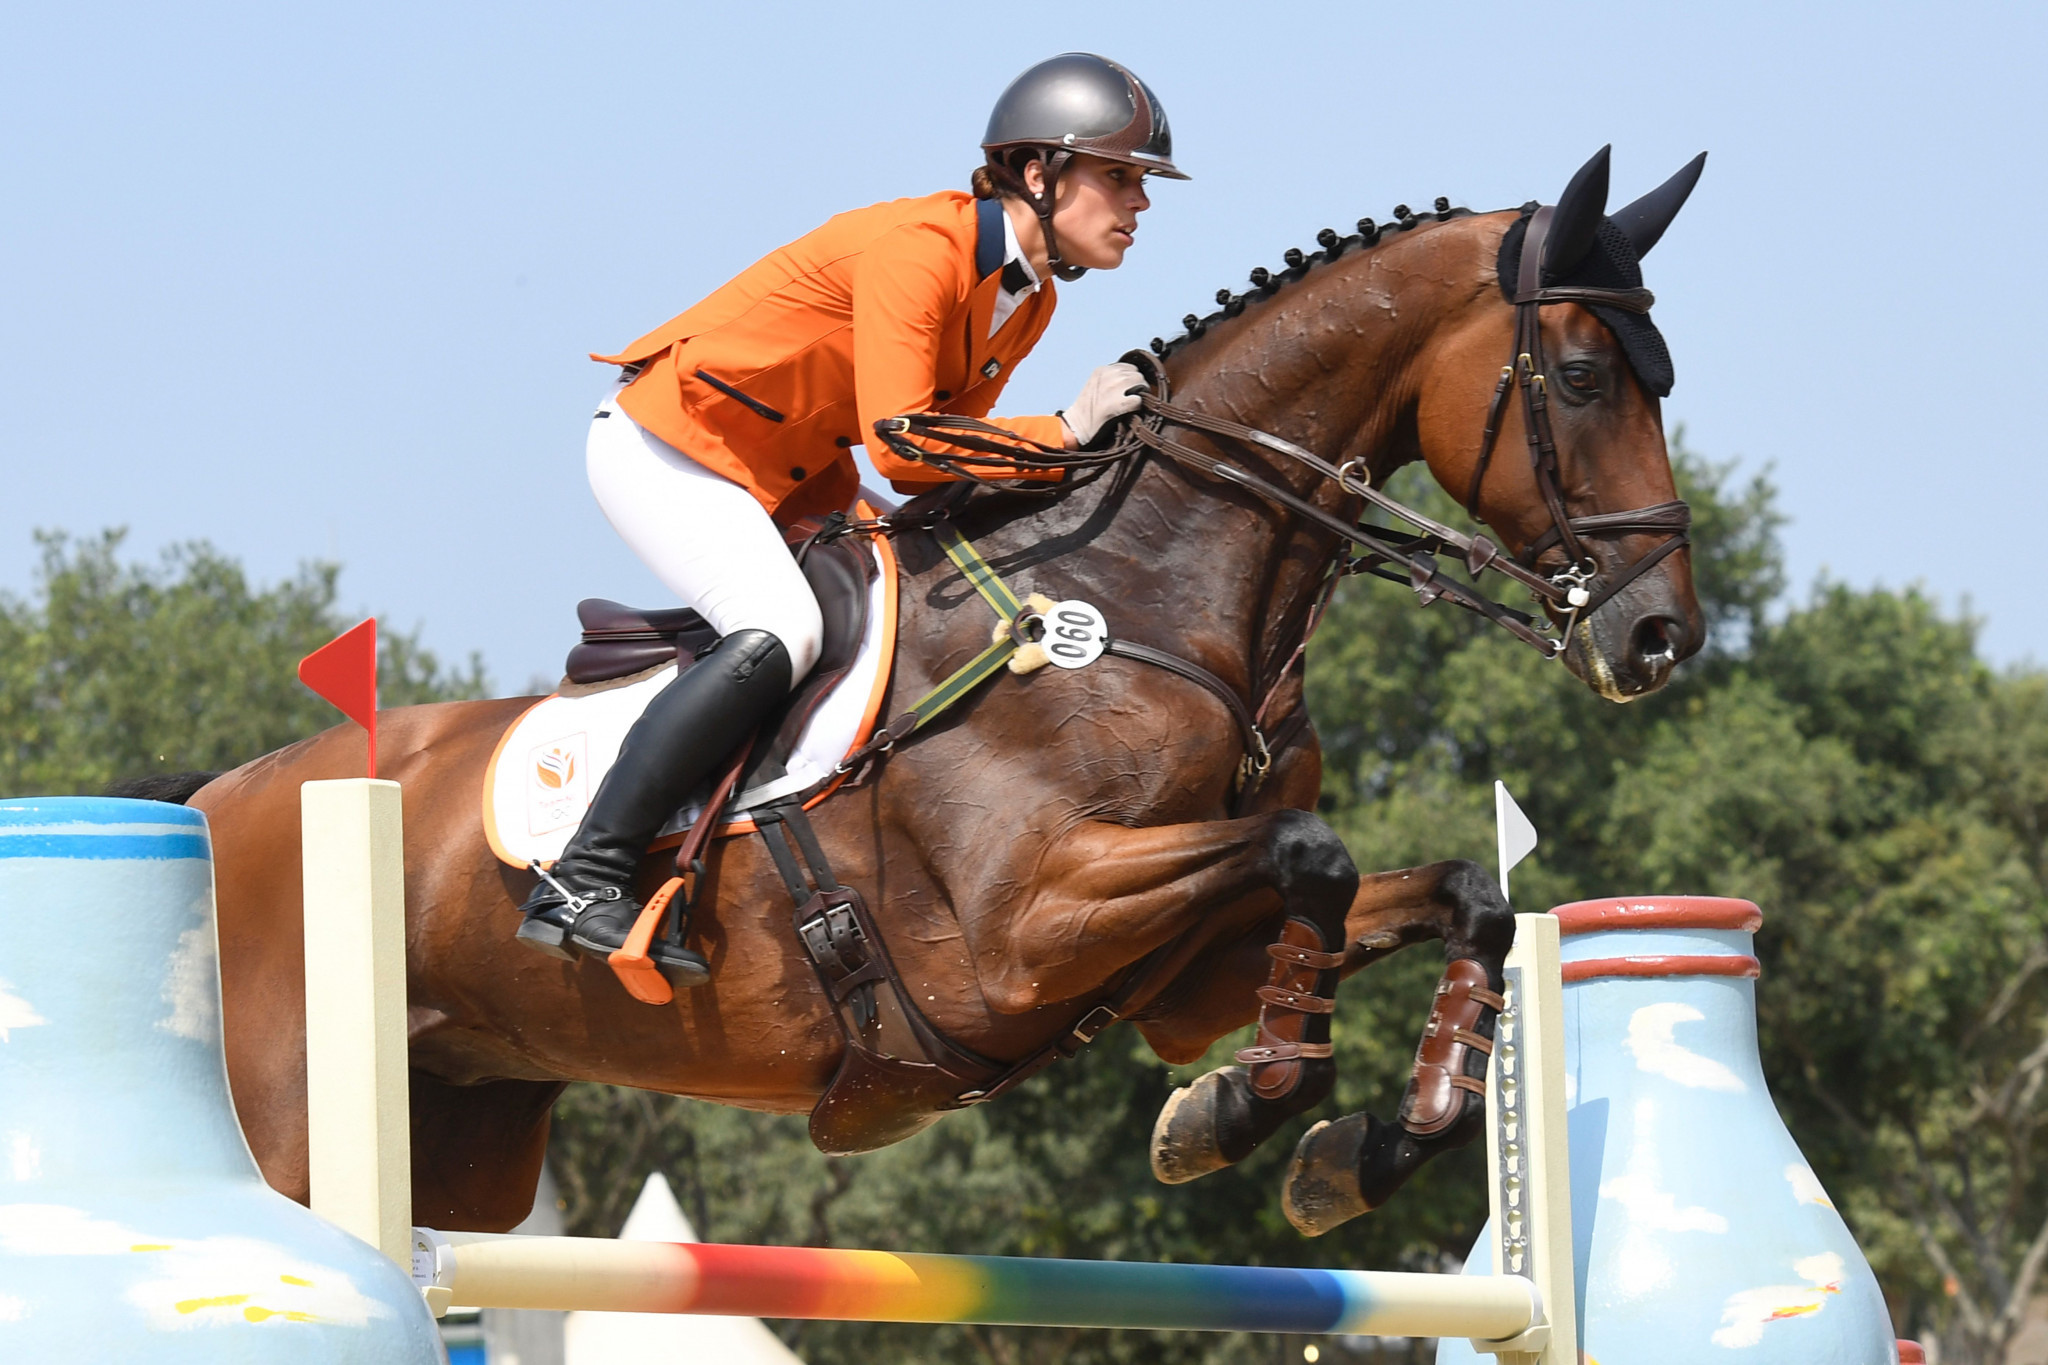 The Netherlands are second in the rankings thanks to the performance of Merel Blom ©Getty Images